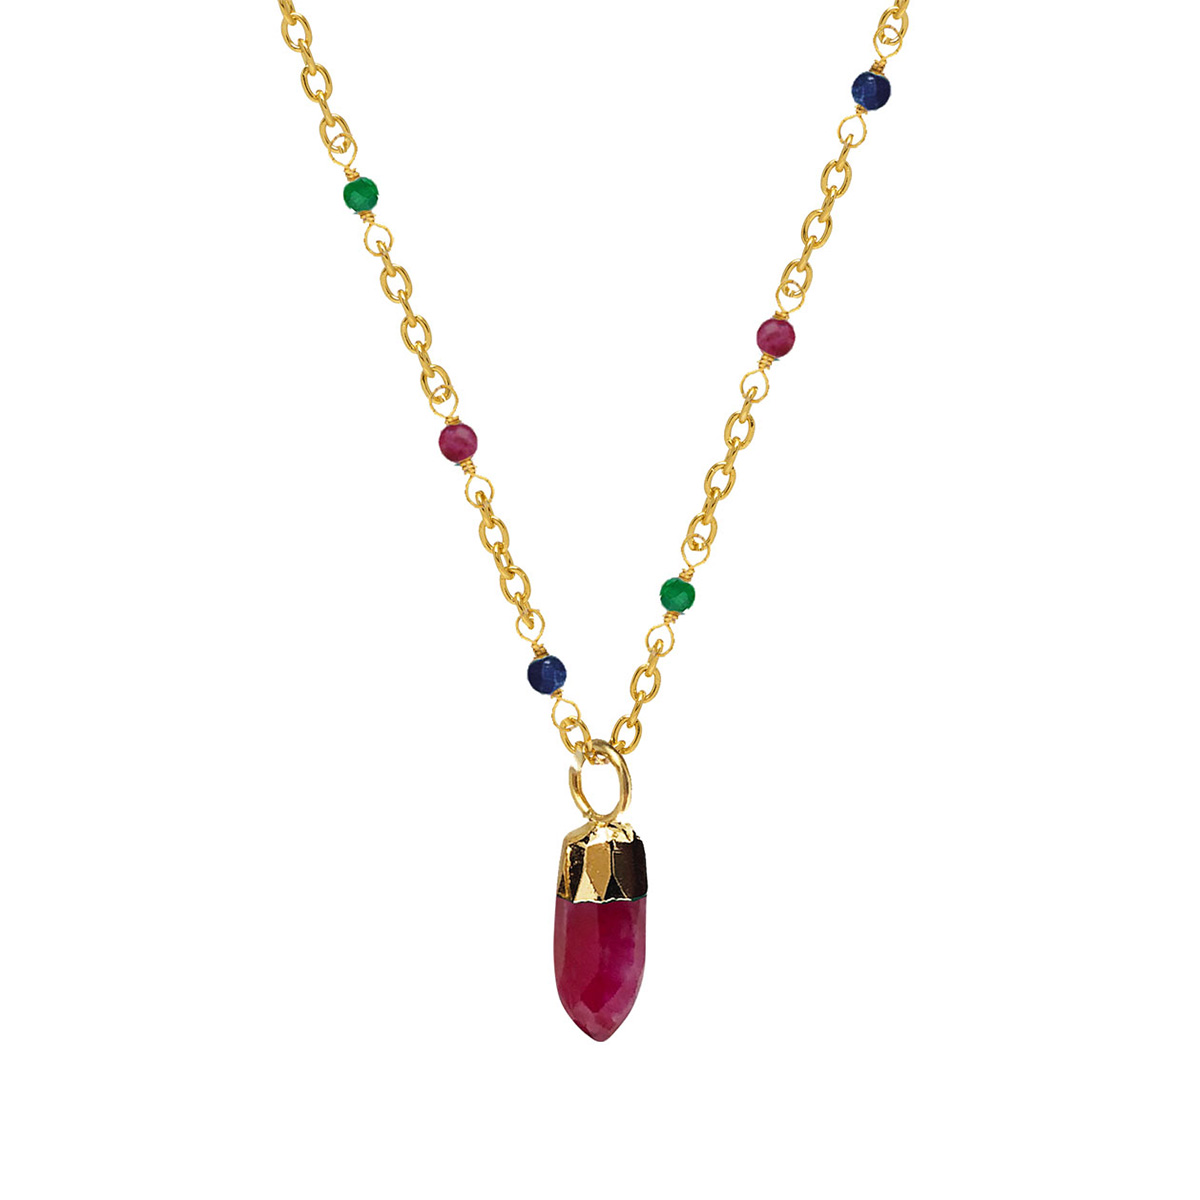 File:Victoria and Albert Museum Jewellery 11042019 Necklet About